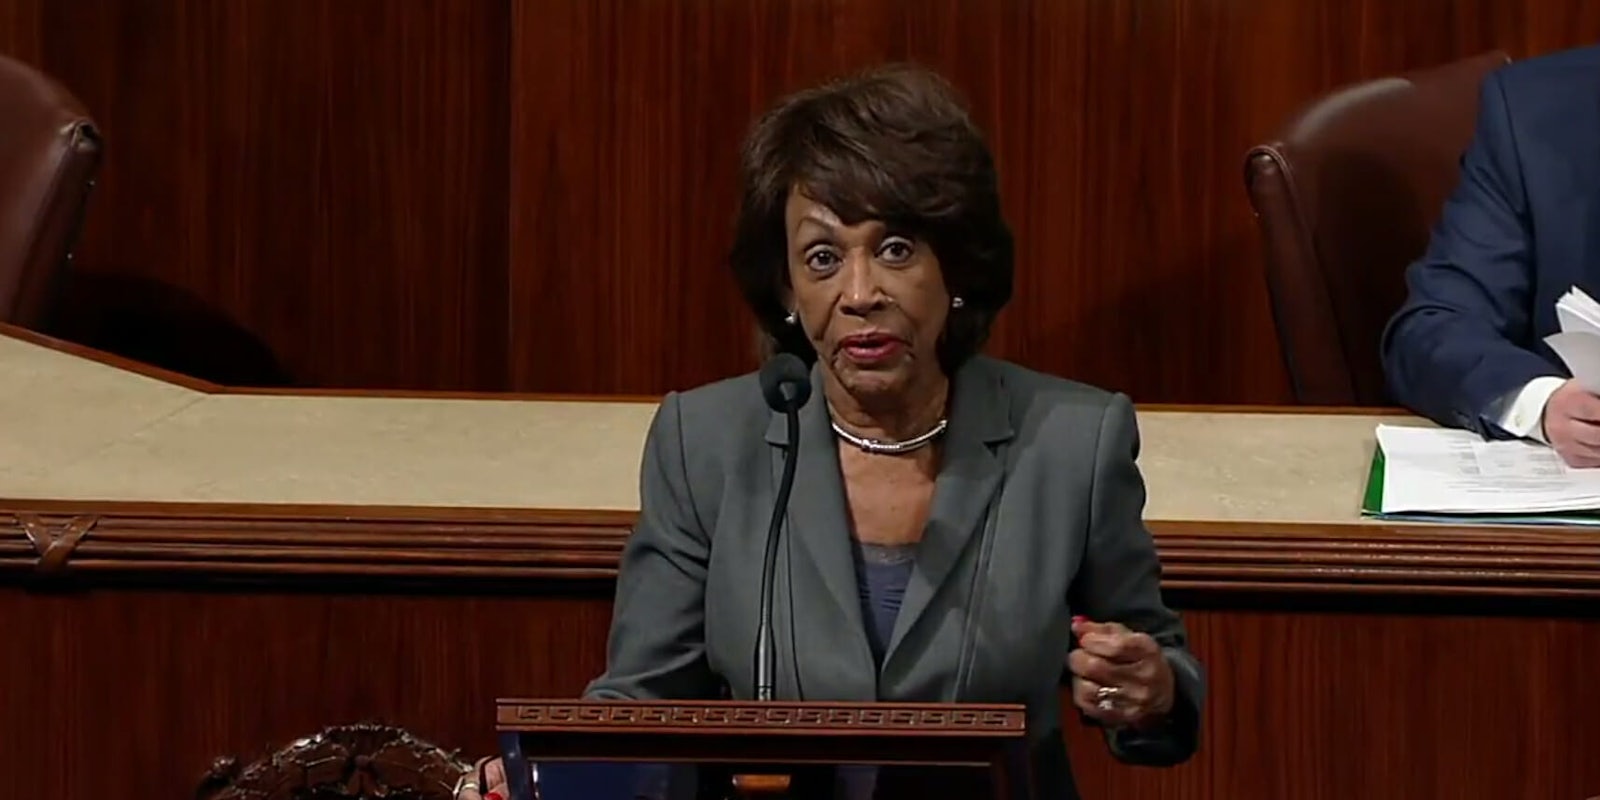 Rep. Maxine Waters says her office has received a number of death threats after comments she made earlier this week.